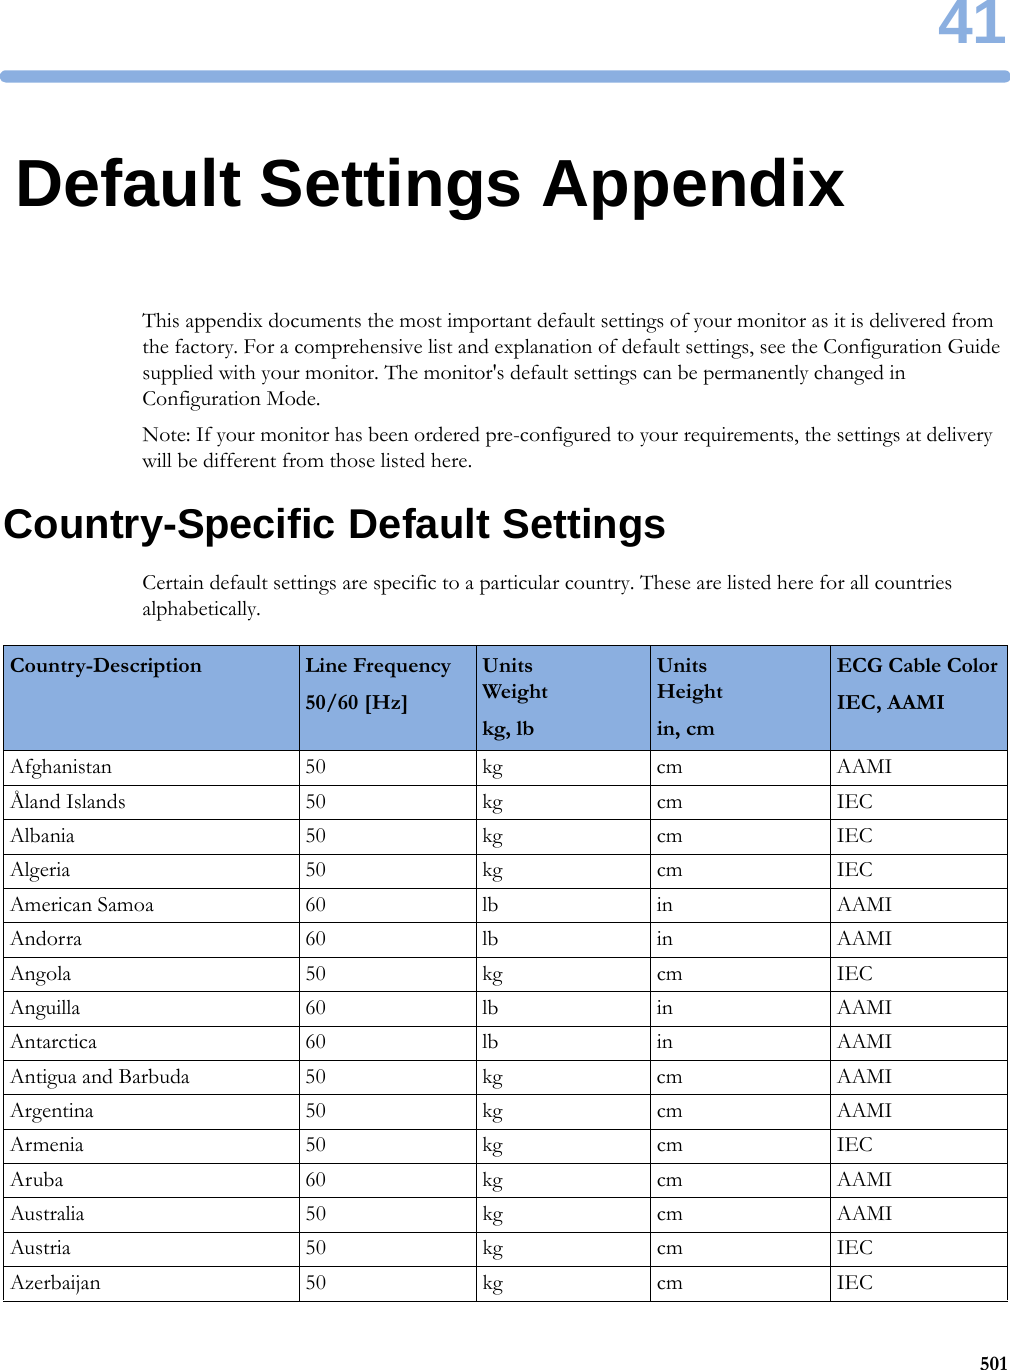 4150141Default Settings AppendixThis appendix documents the most important default settings of your monitor as it is delivered from the factory. For a comprehensive list and explanation of default settings, see the Configuration Guide supplied with your monitor. The monitor&apos;s default settings can be permanently changed in Configuration Mode.Note: If your monitor has been ordered pre-configured to your requirements, the settings at delivery will be different from those listed here.Country-Specific Default SettingsCertain default settings are specific to a particular country. These are listed here for all countries alphabetically.Country-Description Line Frequency50/60 [Hz]UnitsWeightkg, lbUnitsHeightin, cmECG Cable ColorIEC, AAMIAfghanistan 50 kg cm AAMIÅland Islands 50 kg cm IECAlbania 50 kg cm IECAlgeria 50 kg cm IECAmerican Samoa 60 lb in AAMIAndorra 60 lb in AAMIAngola 50 kg cm IECAnguilla 60 lb in AAMIAntarctica 60 lb in AAMIAntigua and Barbuda 50 kg cm AAMIArgentina 50 kg cm AAMIArmenia 50 kg cm IECAruba 60 kg cm AAMIAustralia 50 kg cm AAMIAustria 50 kg cm IECAzerbaijan 50 kg cm IEC